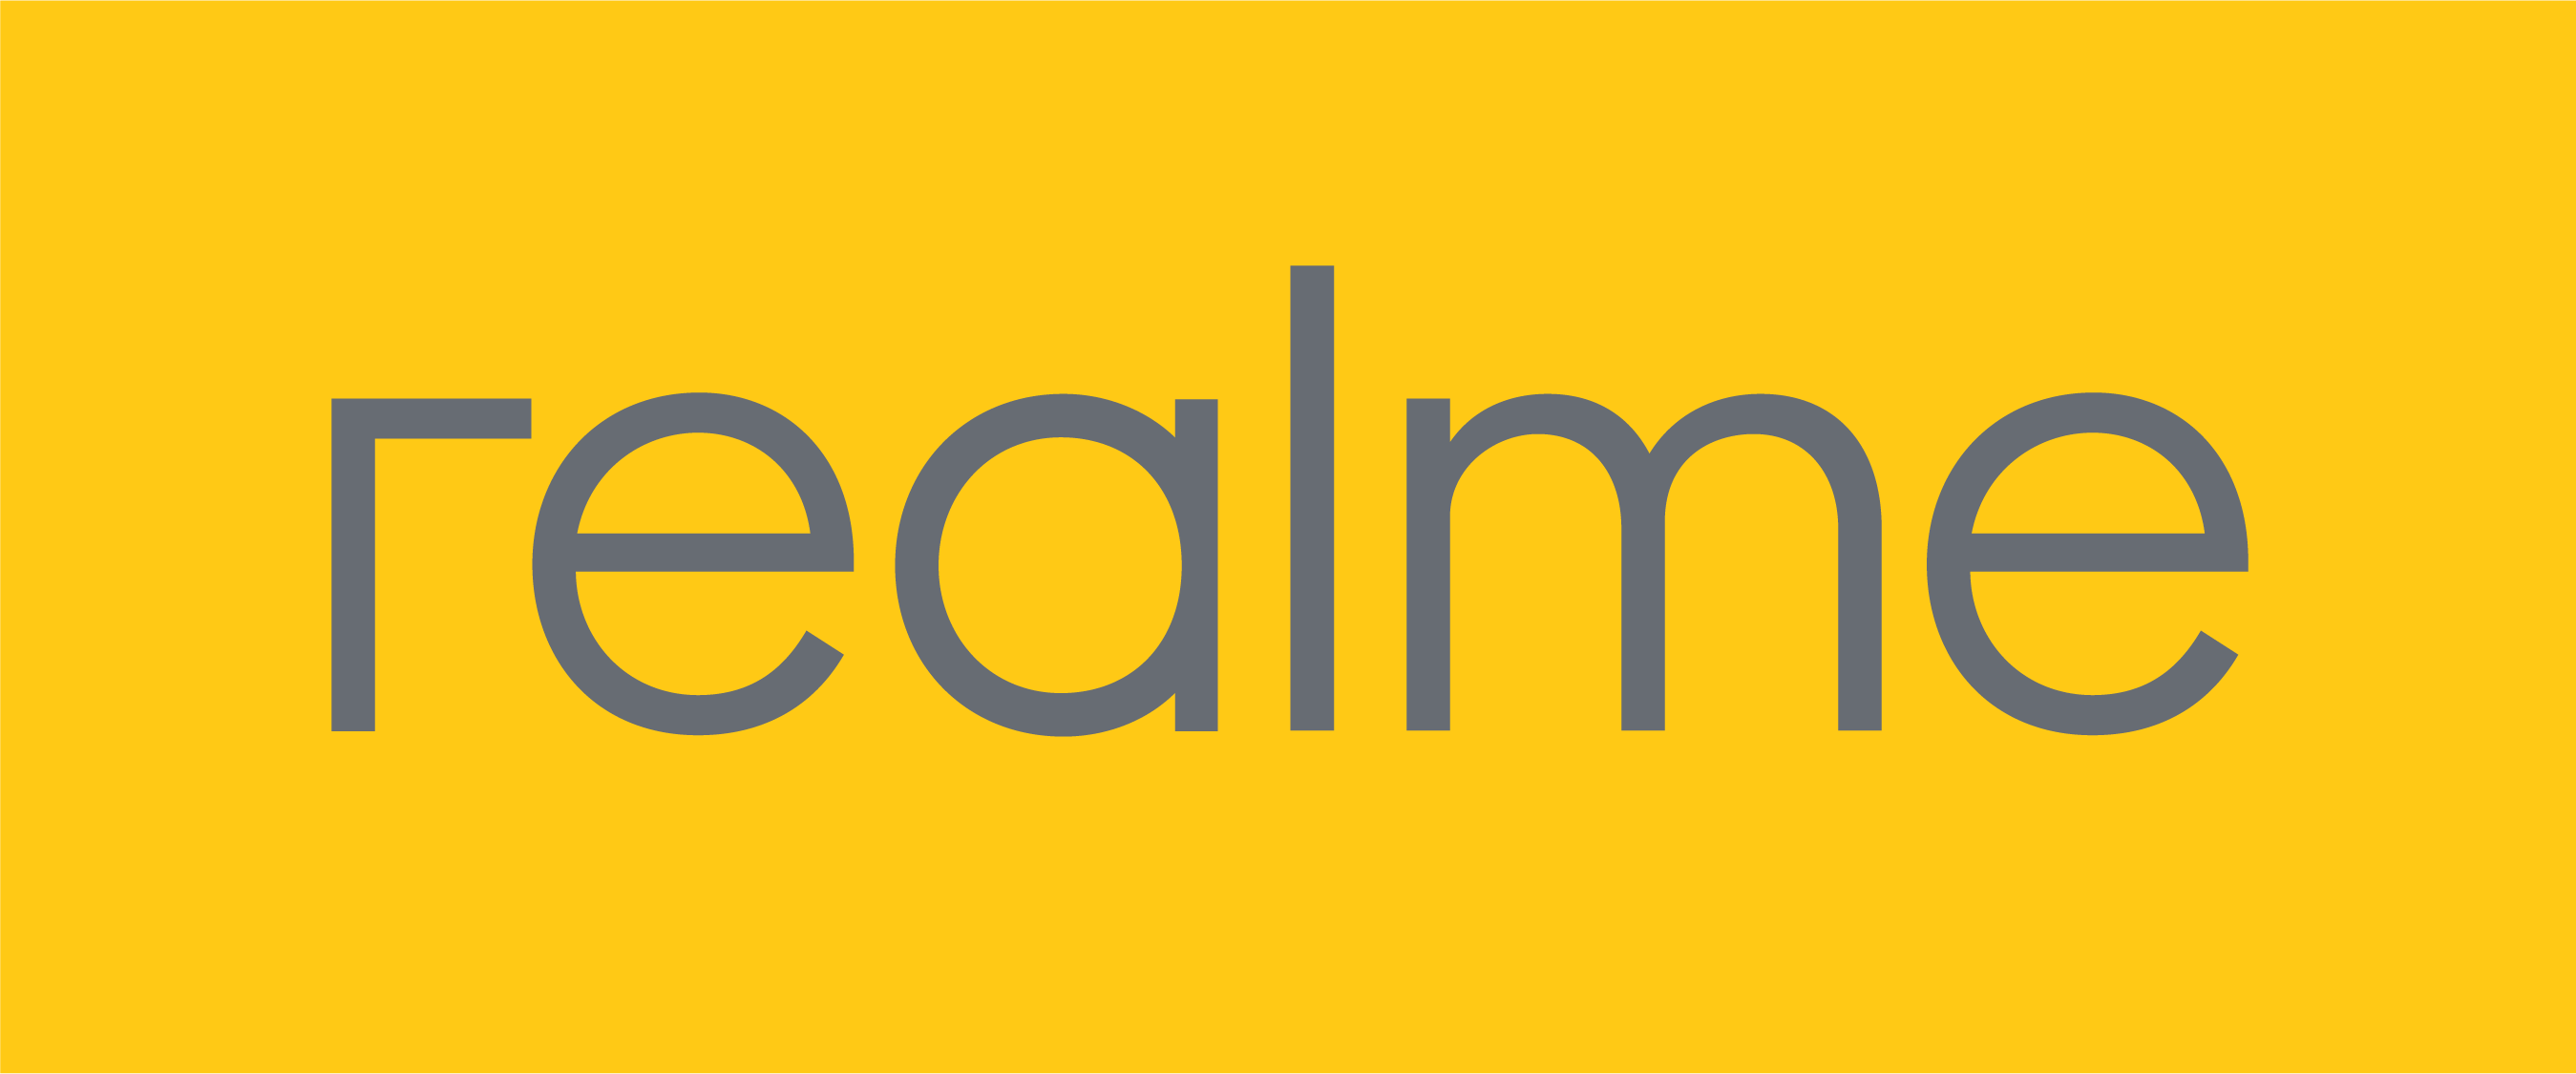 [Officially confirmed] Realme X India launch set for 2019 H2, might come earlier